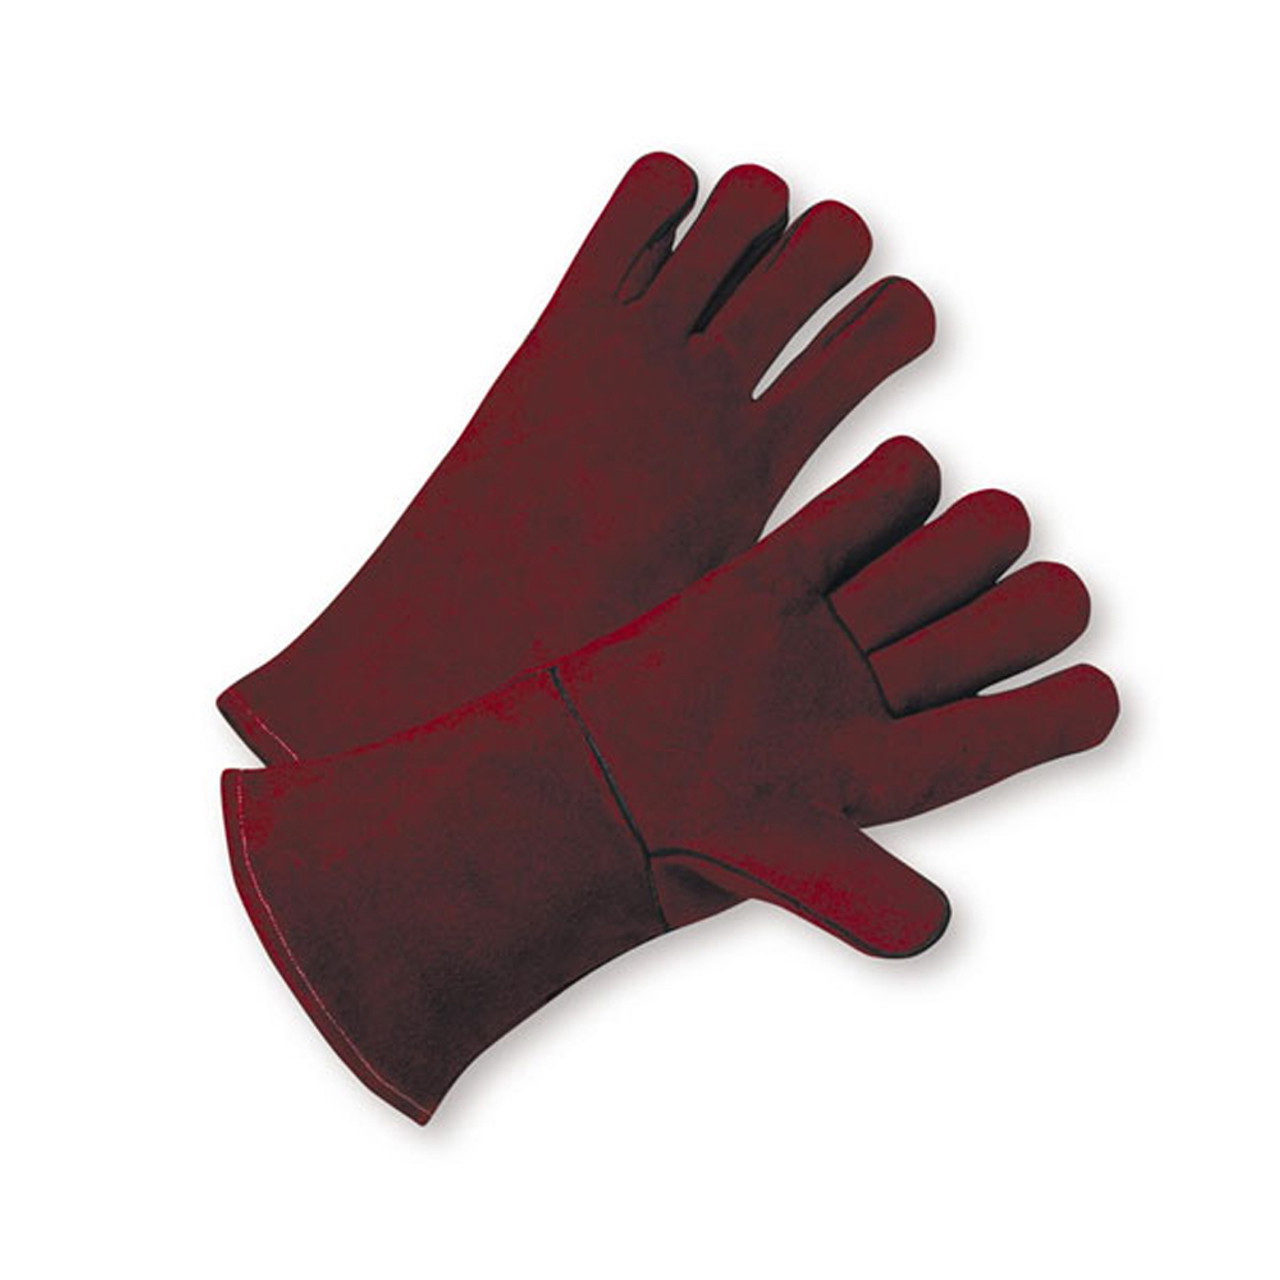 Copperfield 02473048 Heavy-Duty Insulated Gloves, Cowhide, Maroon - 1